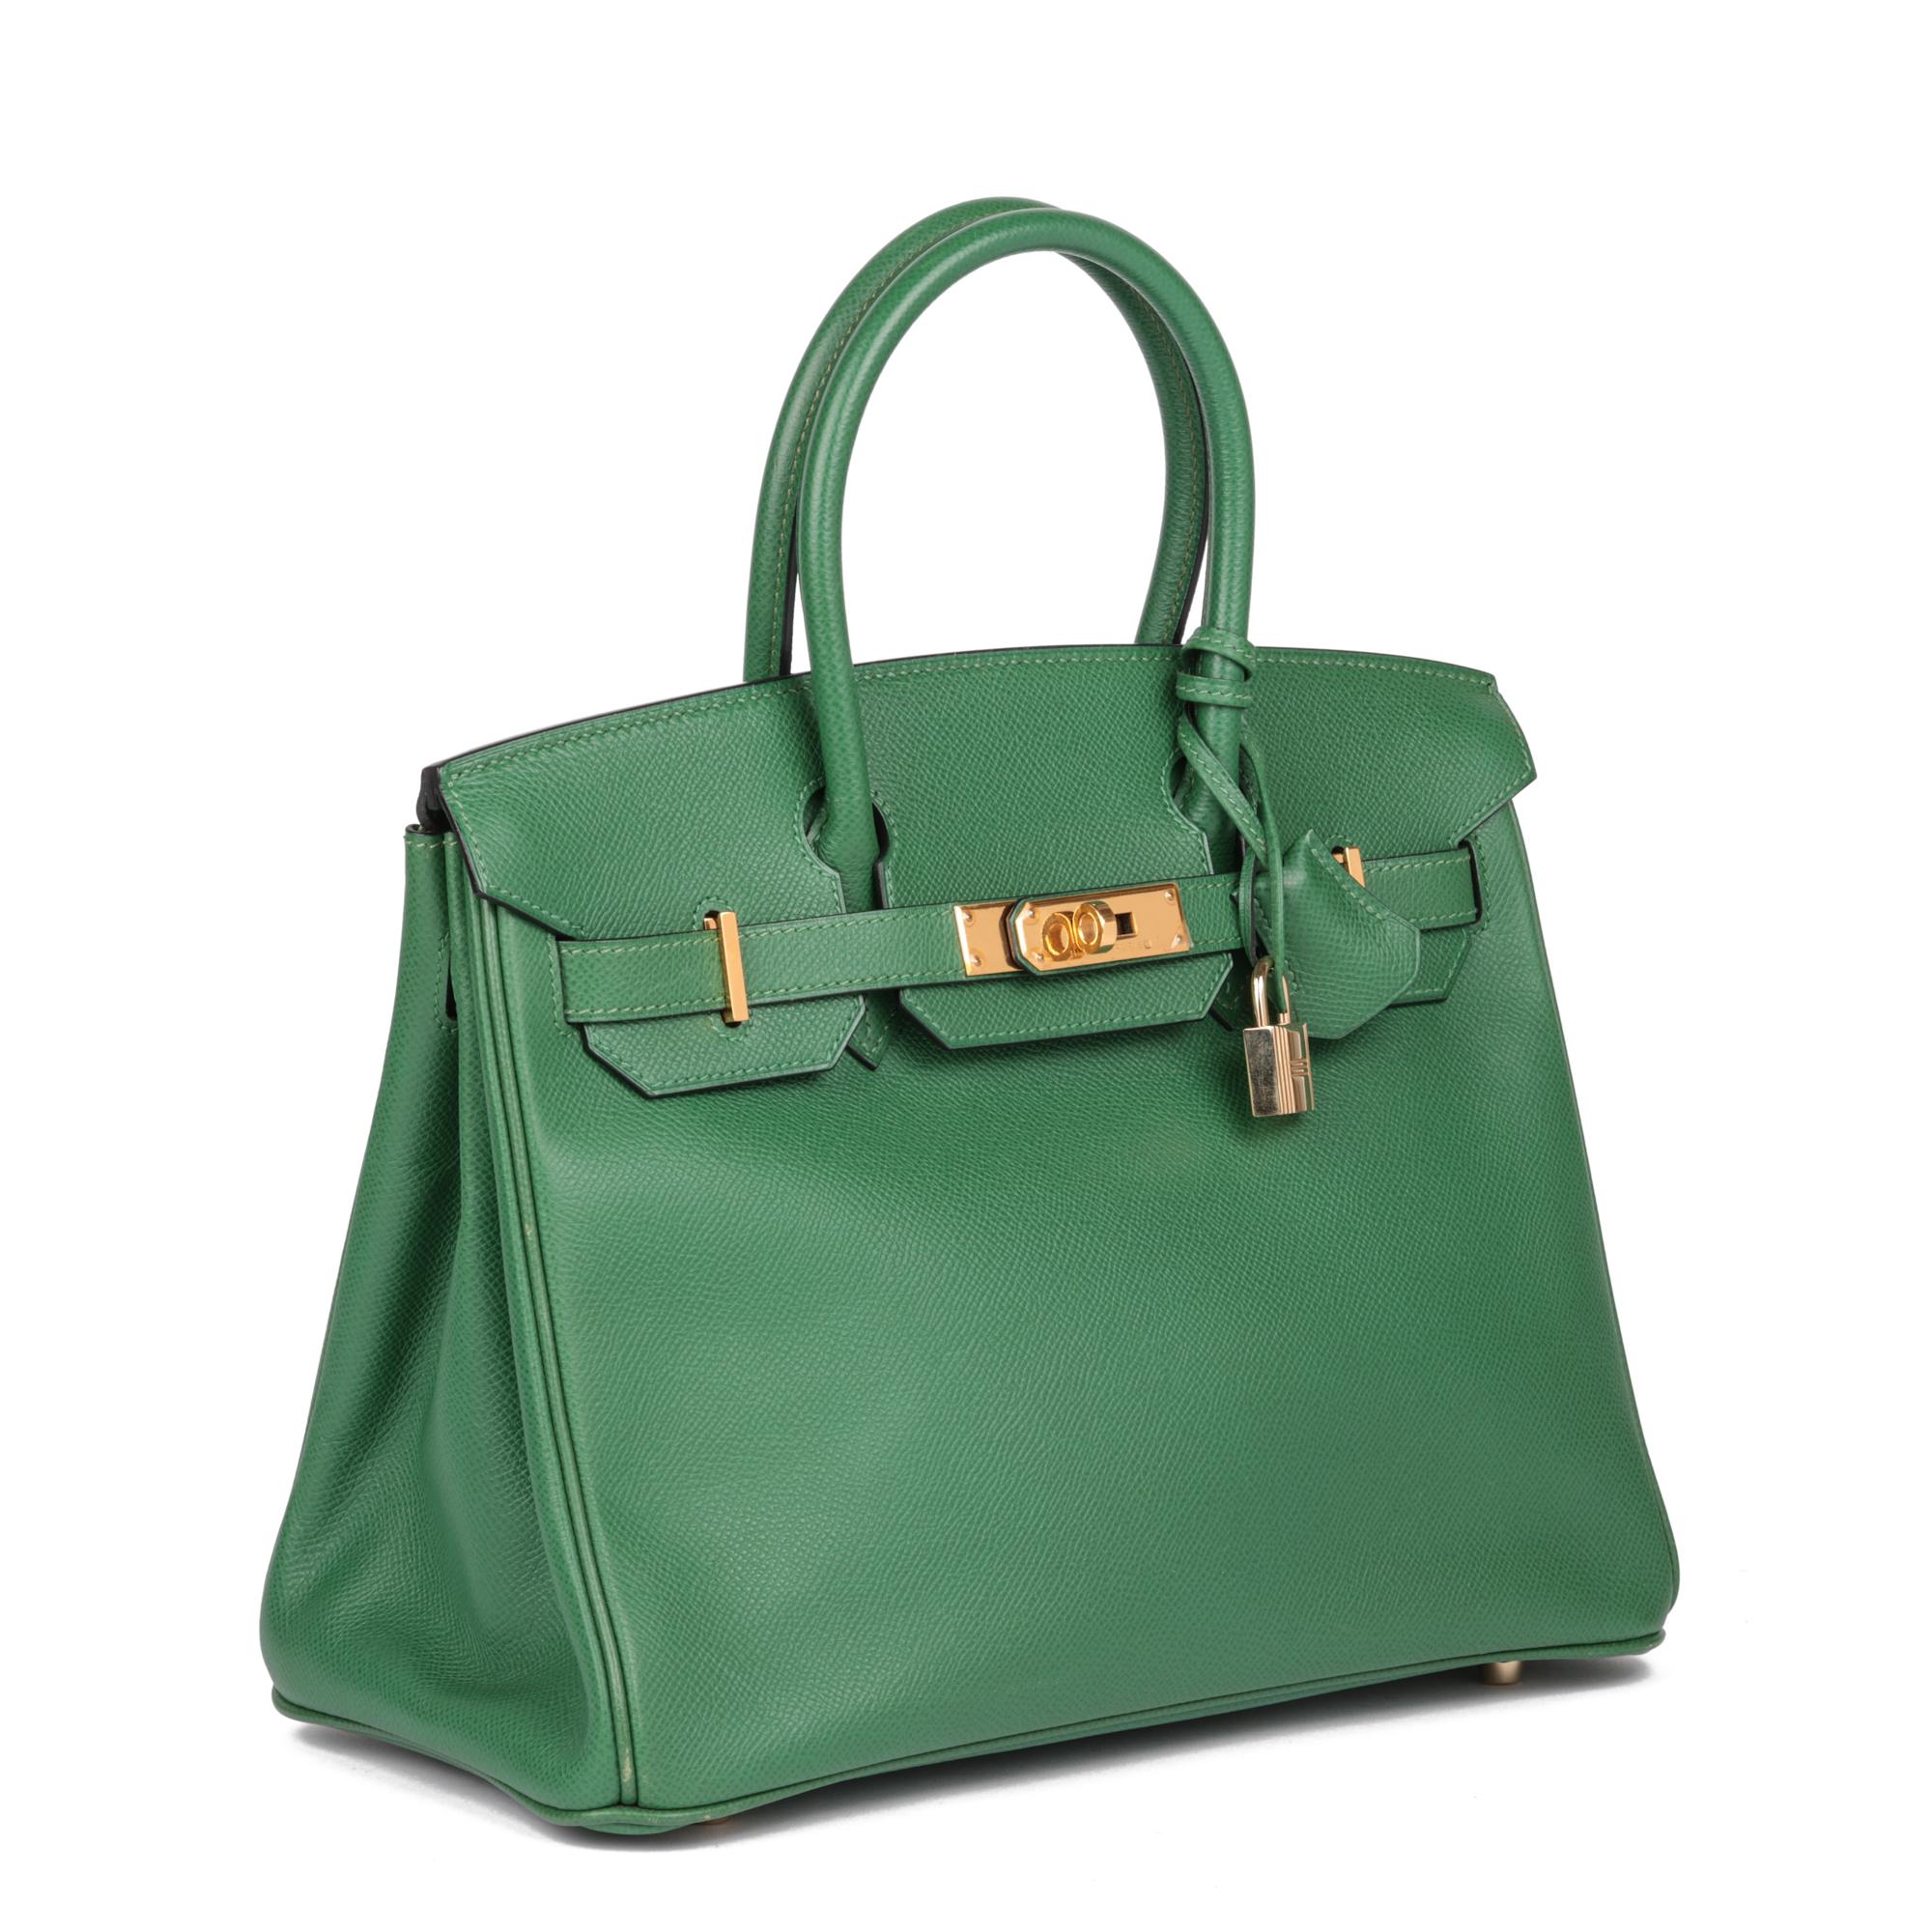 HERMÈS
Vert Bengale Courchevel Leather Vintage Birkin 30cm

Xupes Reference: CB893
Serial Number: [F]
Age (Circa): 2002
Accompanied By: Hermès Dust Bag, Padlock, Keys, Clochette, Raincover 
Authenticity Details: Date Stamp (Made in France)
Gender: